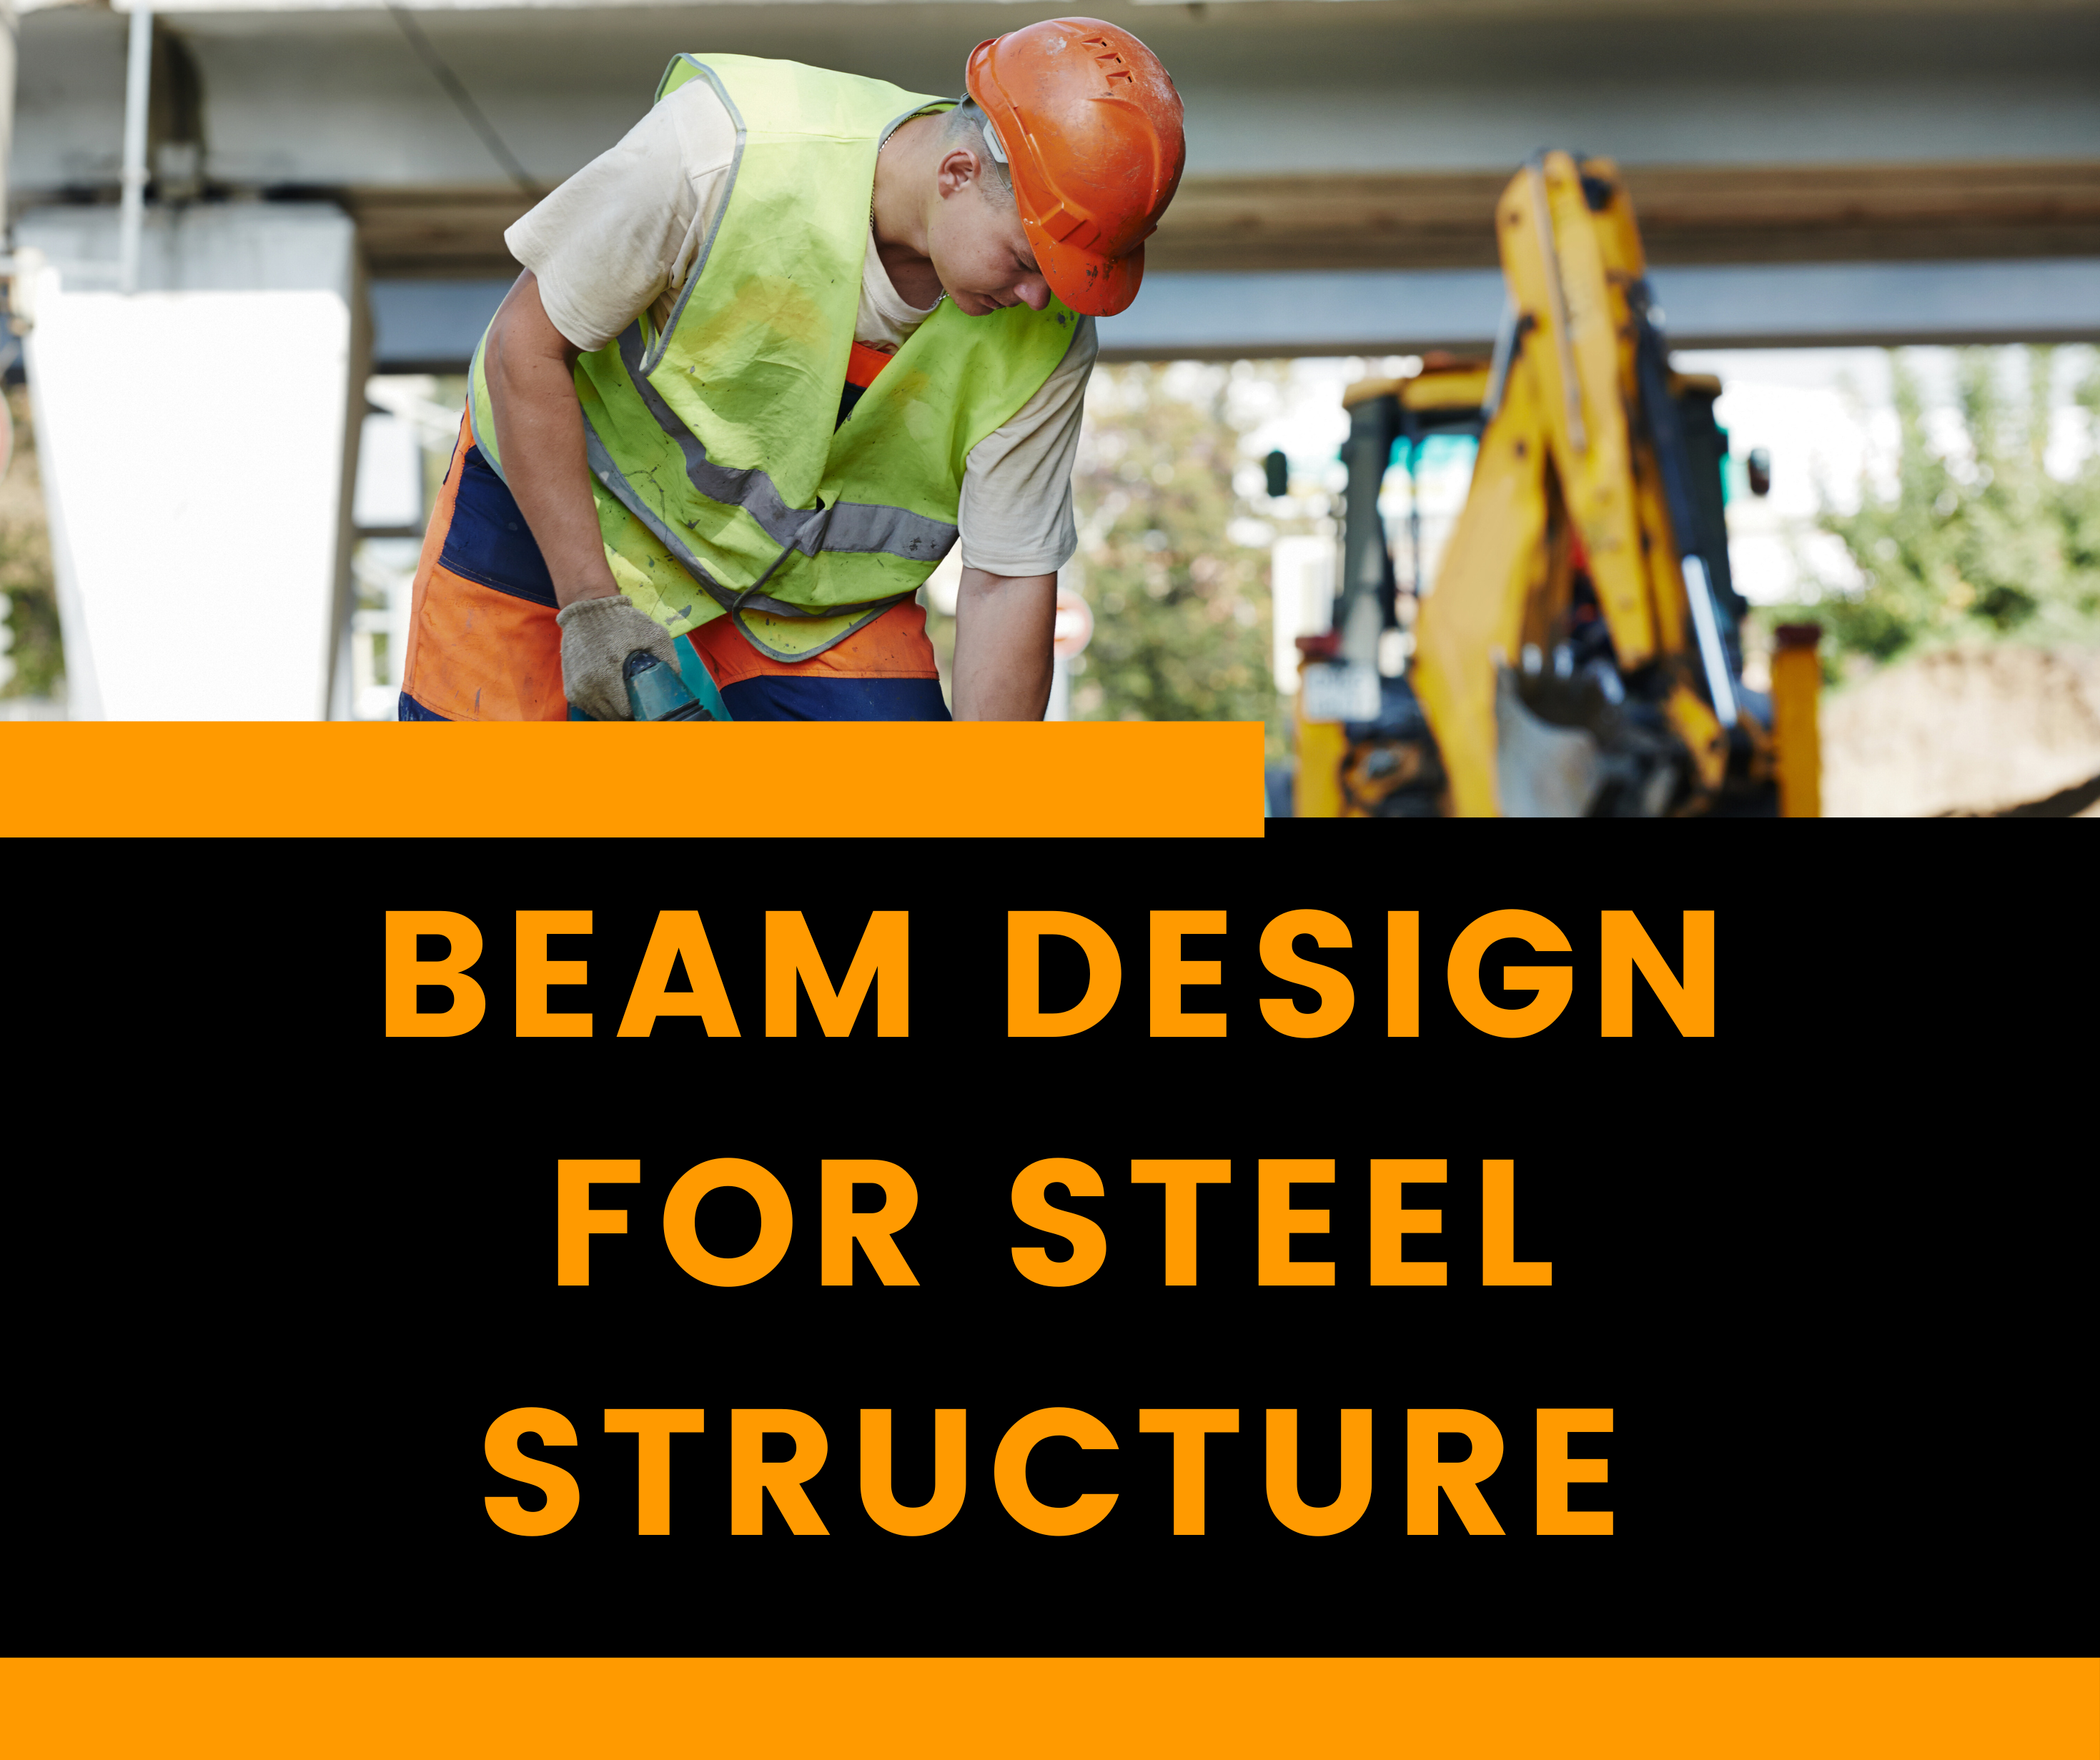 Beam Design For Steel Structure